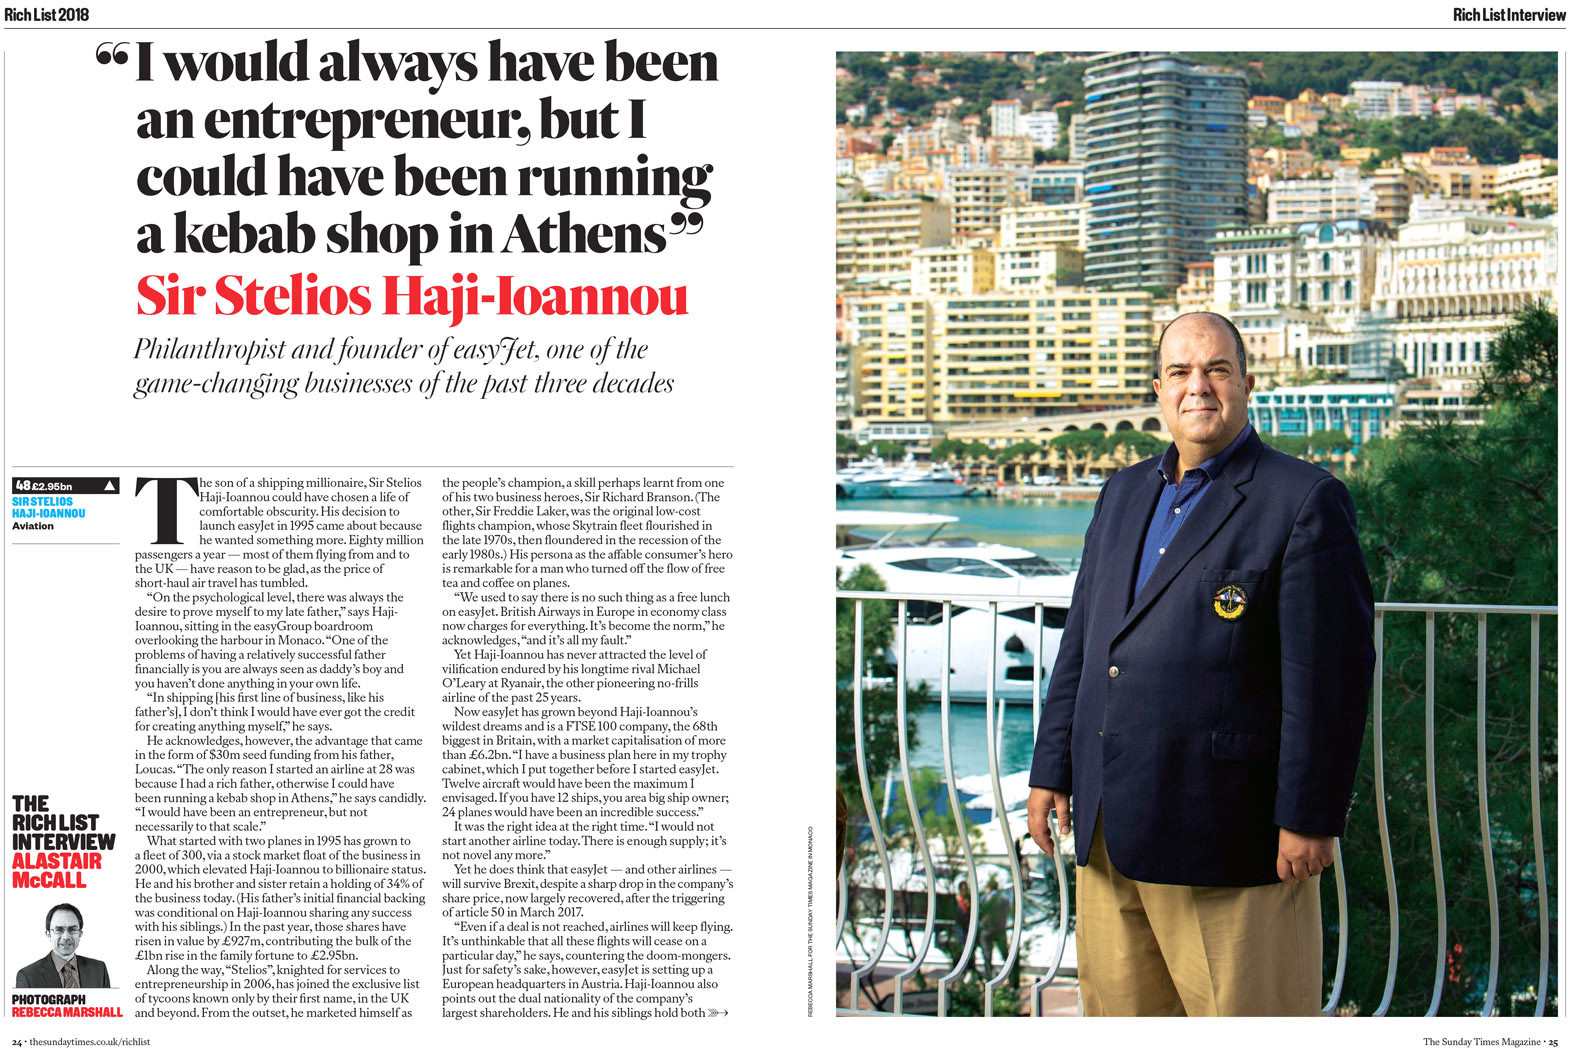 Double page spread of Sunday Times Magazine showing portrait of Stelios Haji-Ioannou standing above Monaco harbour on the right